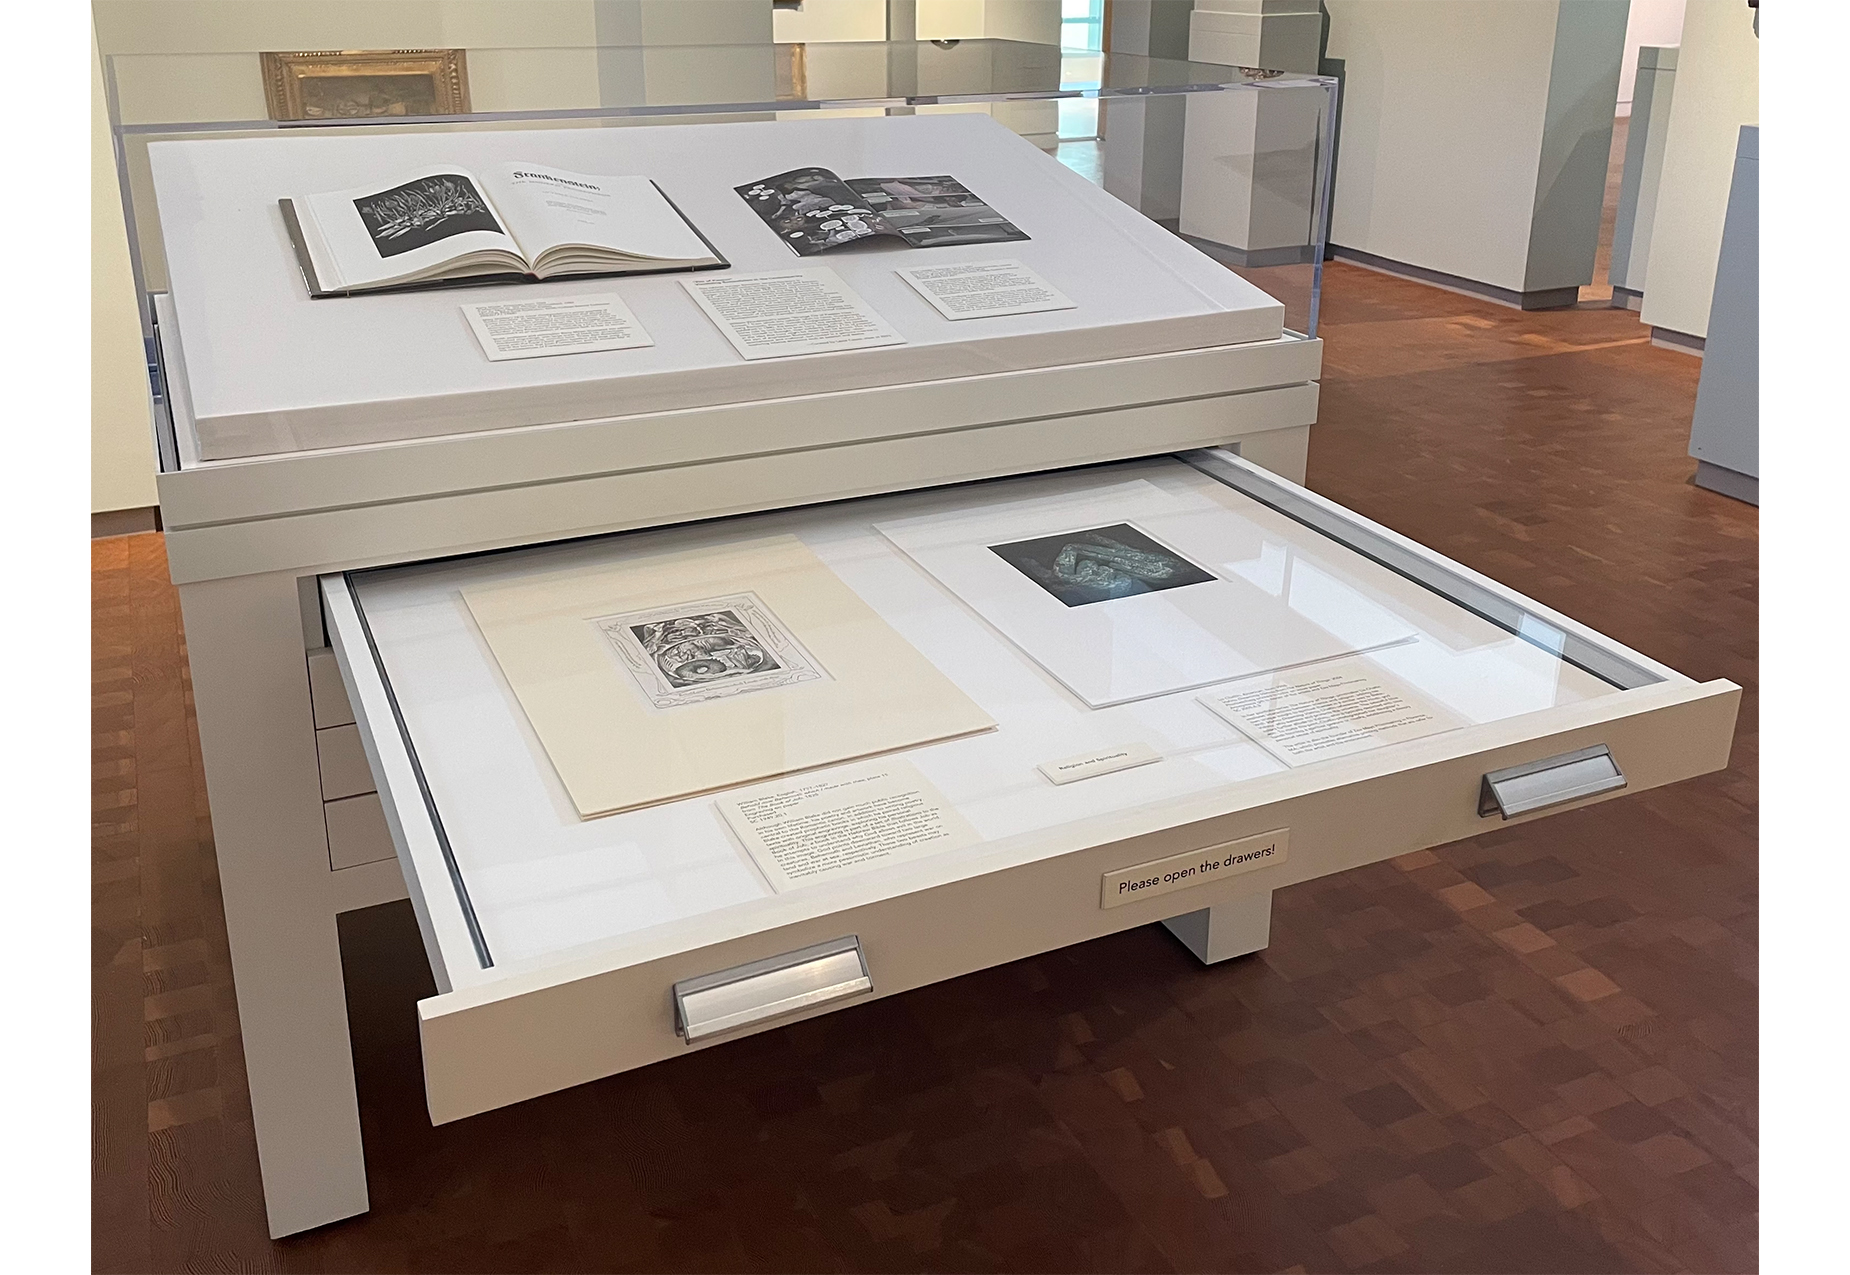 art gallery with display cabinet in the center, two open books on top of display cabinet and one drawer open to reveal two prints